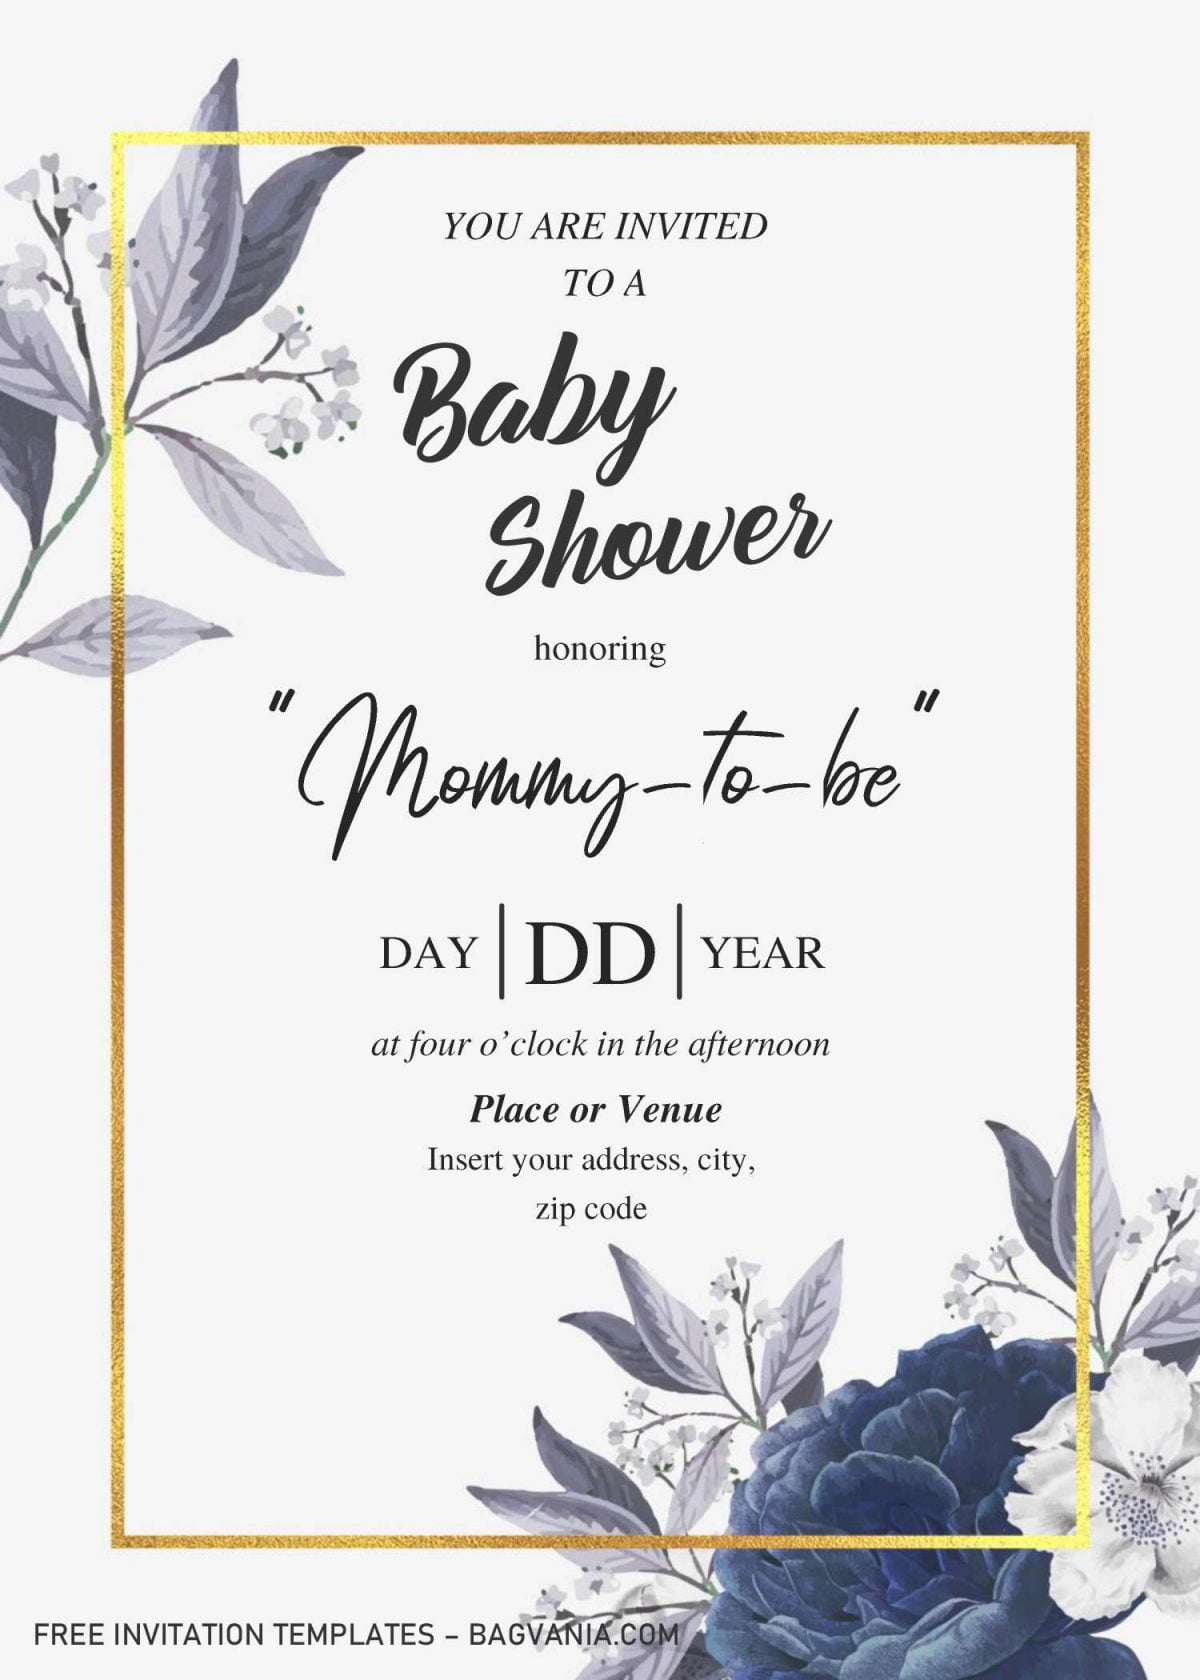 Dusty Blue Rose Baby Shower Invitation Templates - Editable With MS Word and has dusty blue roses and gold frame border